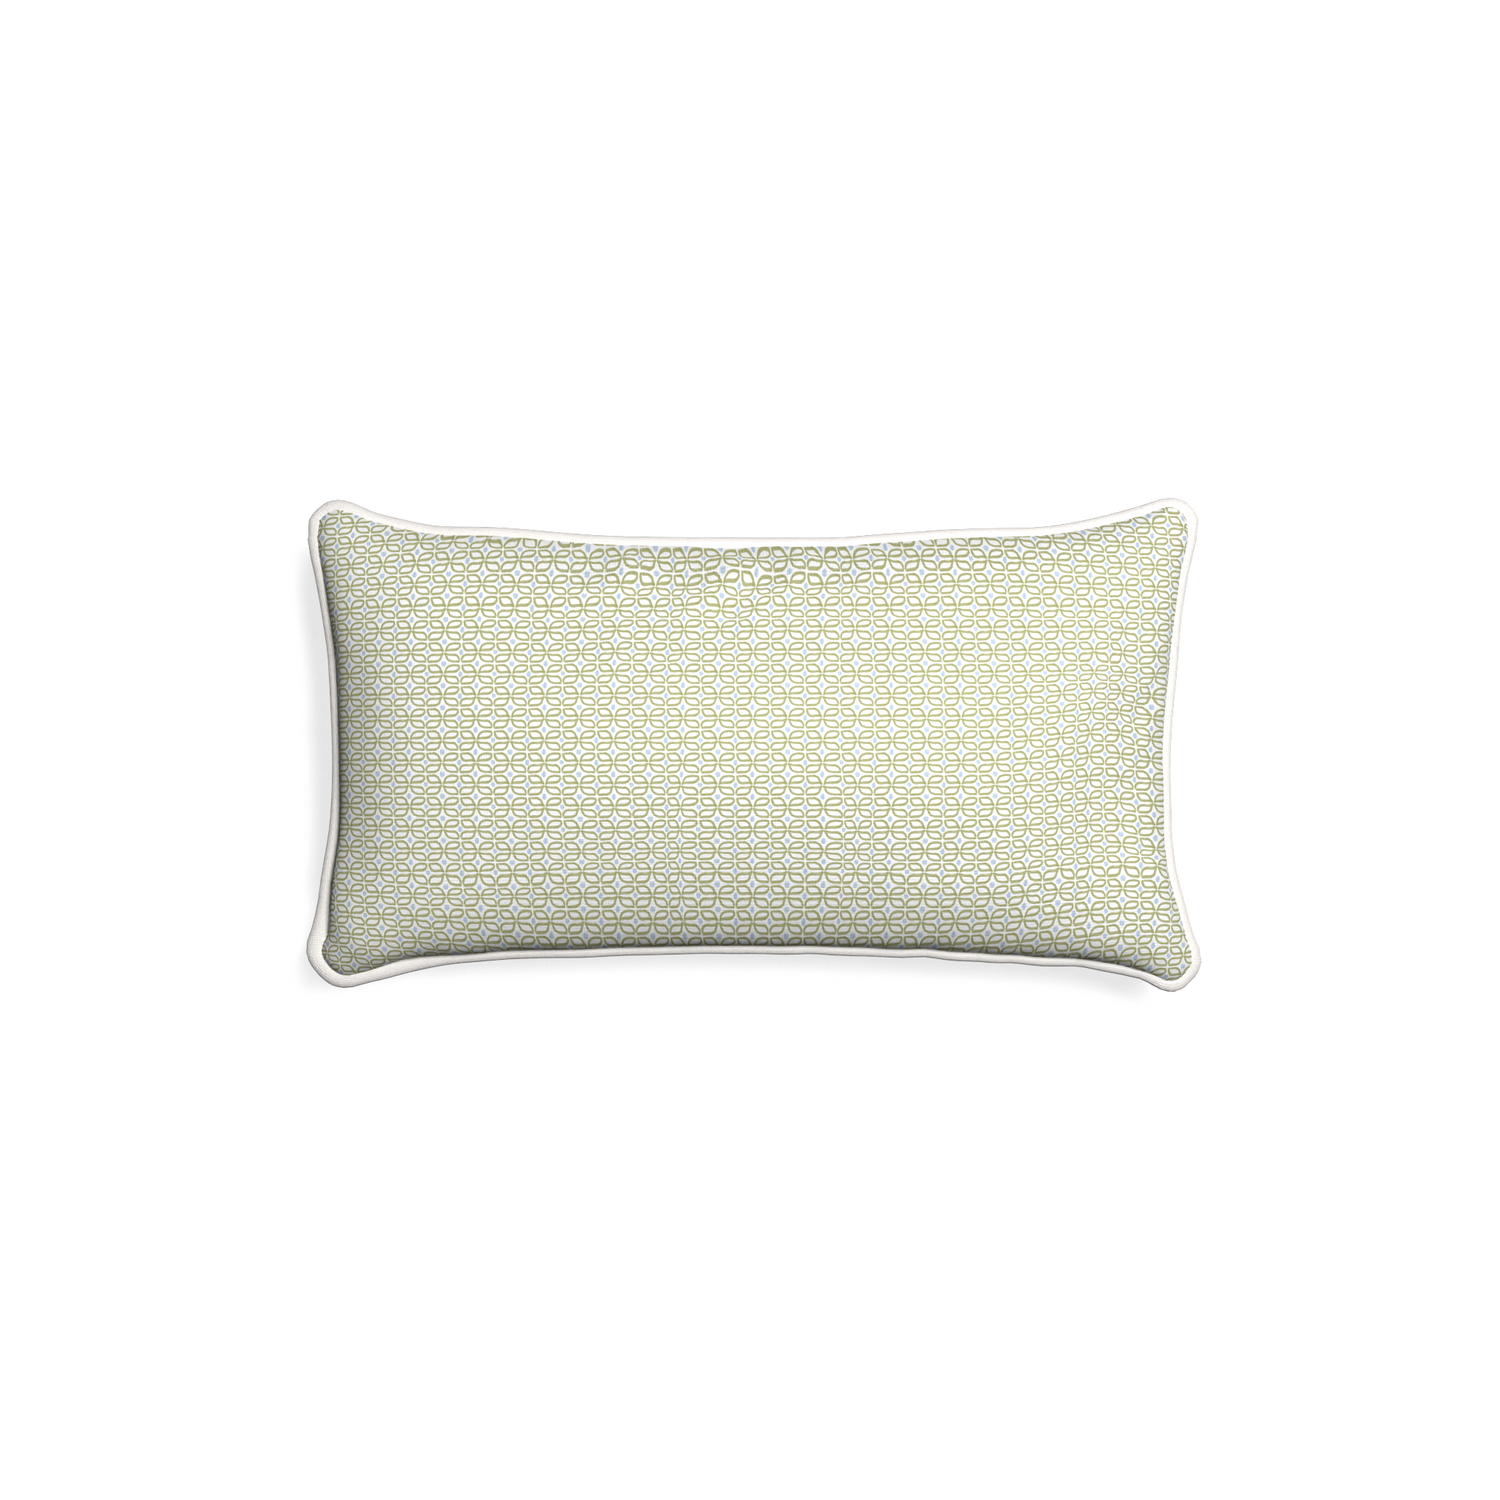 Petite-lumbar loomi moss custom moss green geometricpillow with snow piping on white background